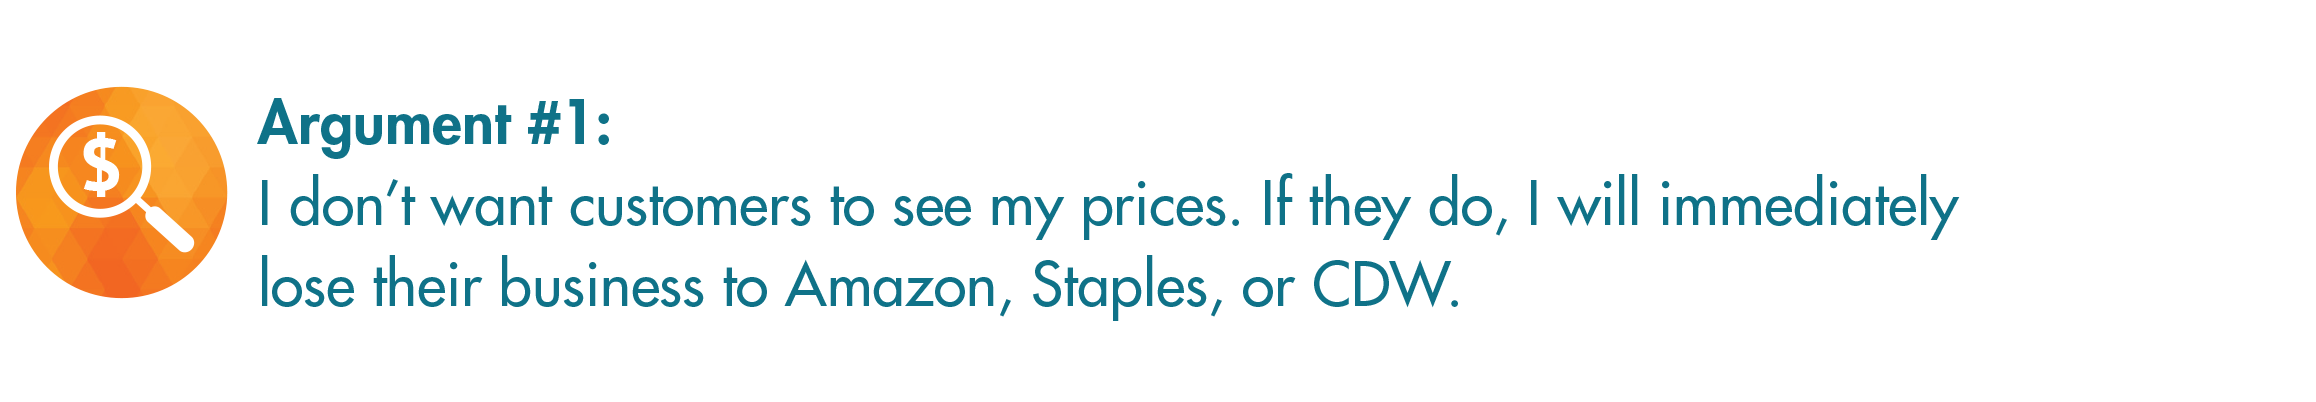 Argument 1: I don’t want customers to see my prices. If they do, I will immediately lose their business to Amazon, Staples, or CDW.